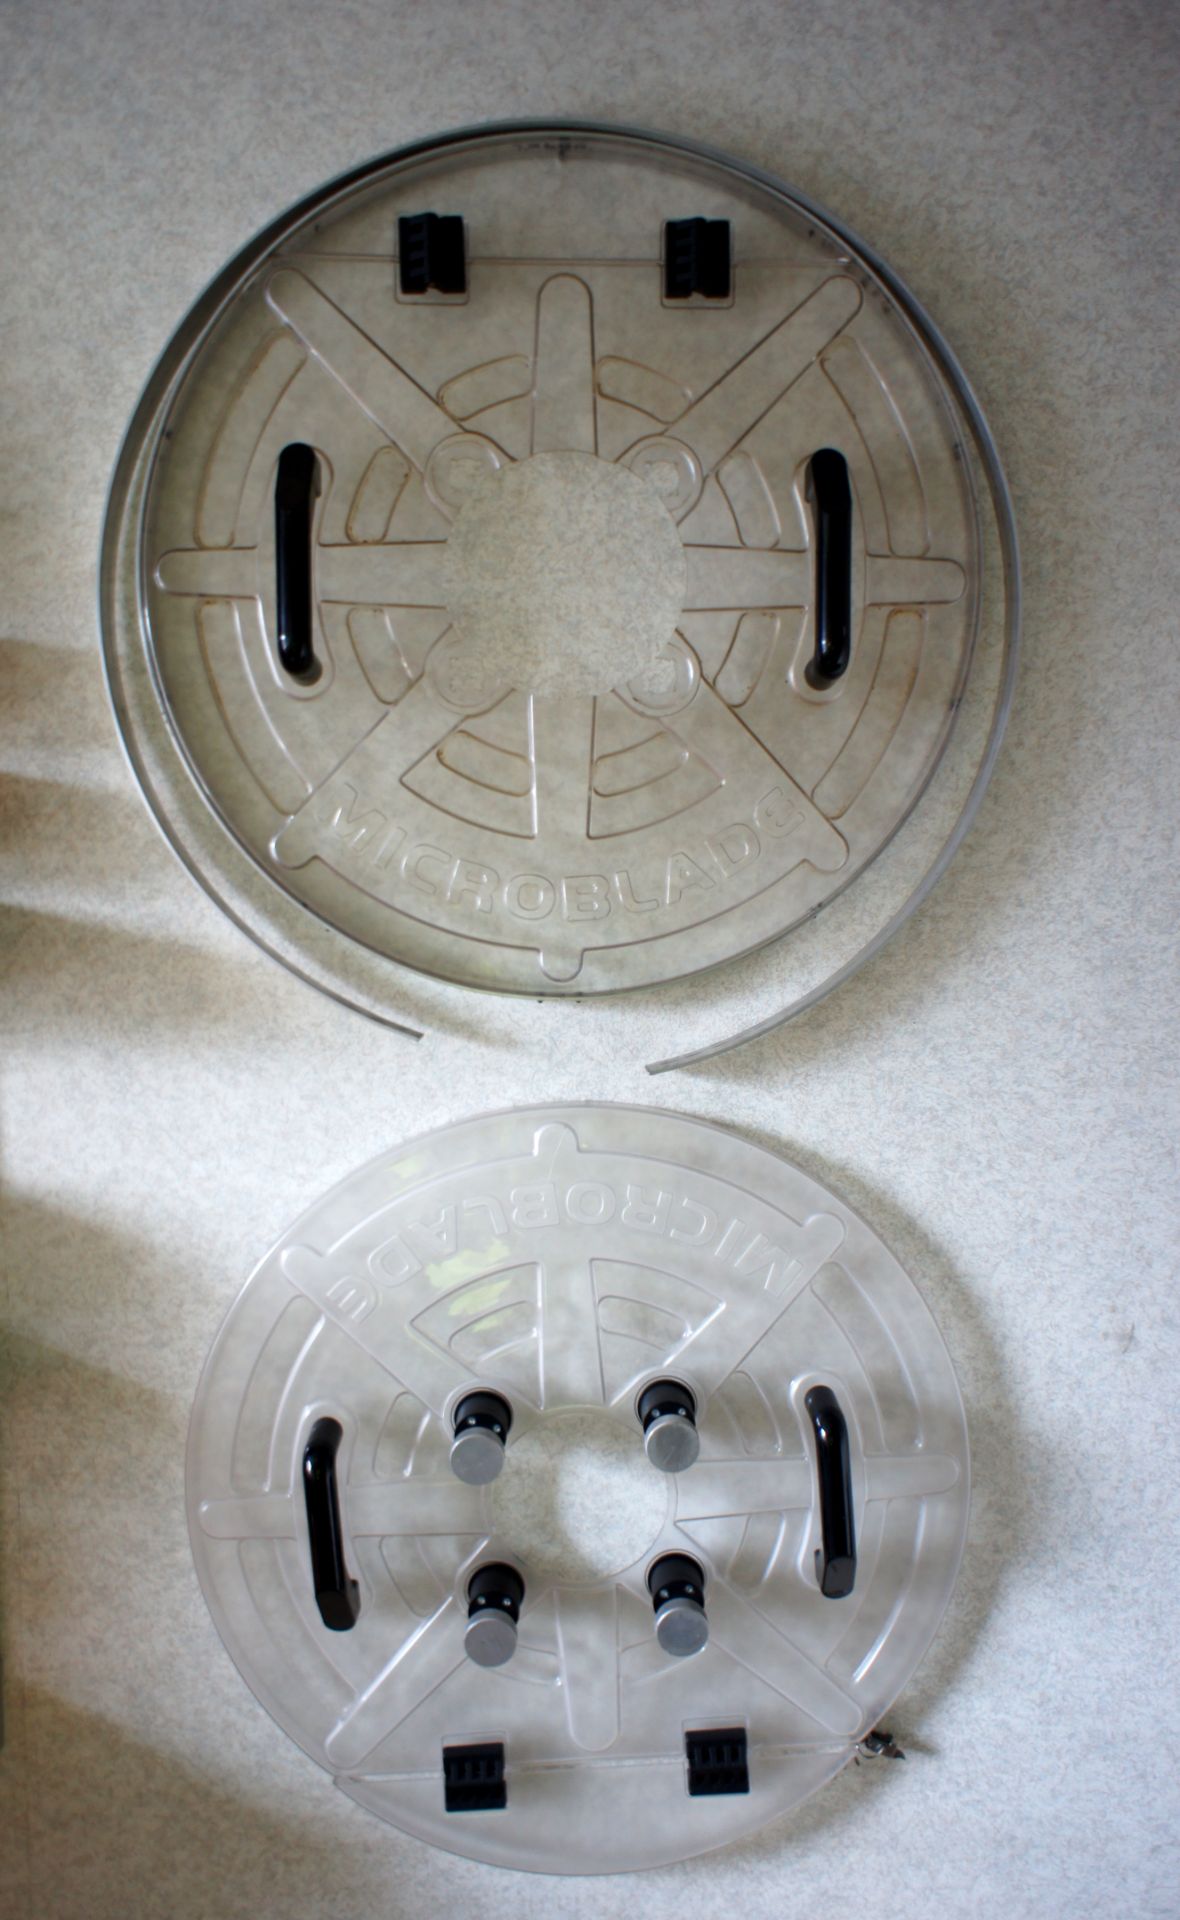 Blade Sheild Plastic Mould Tool - Image 4 of 7